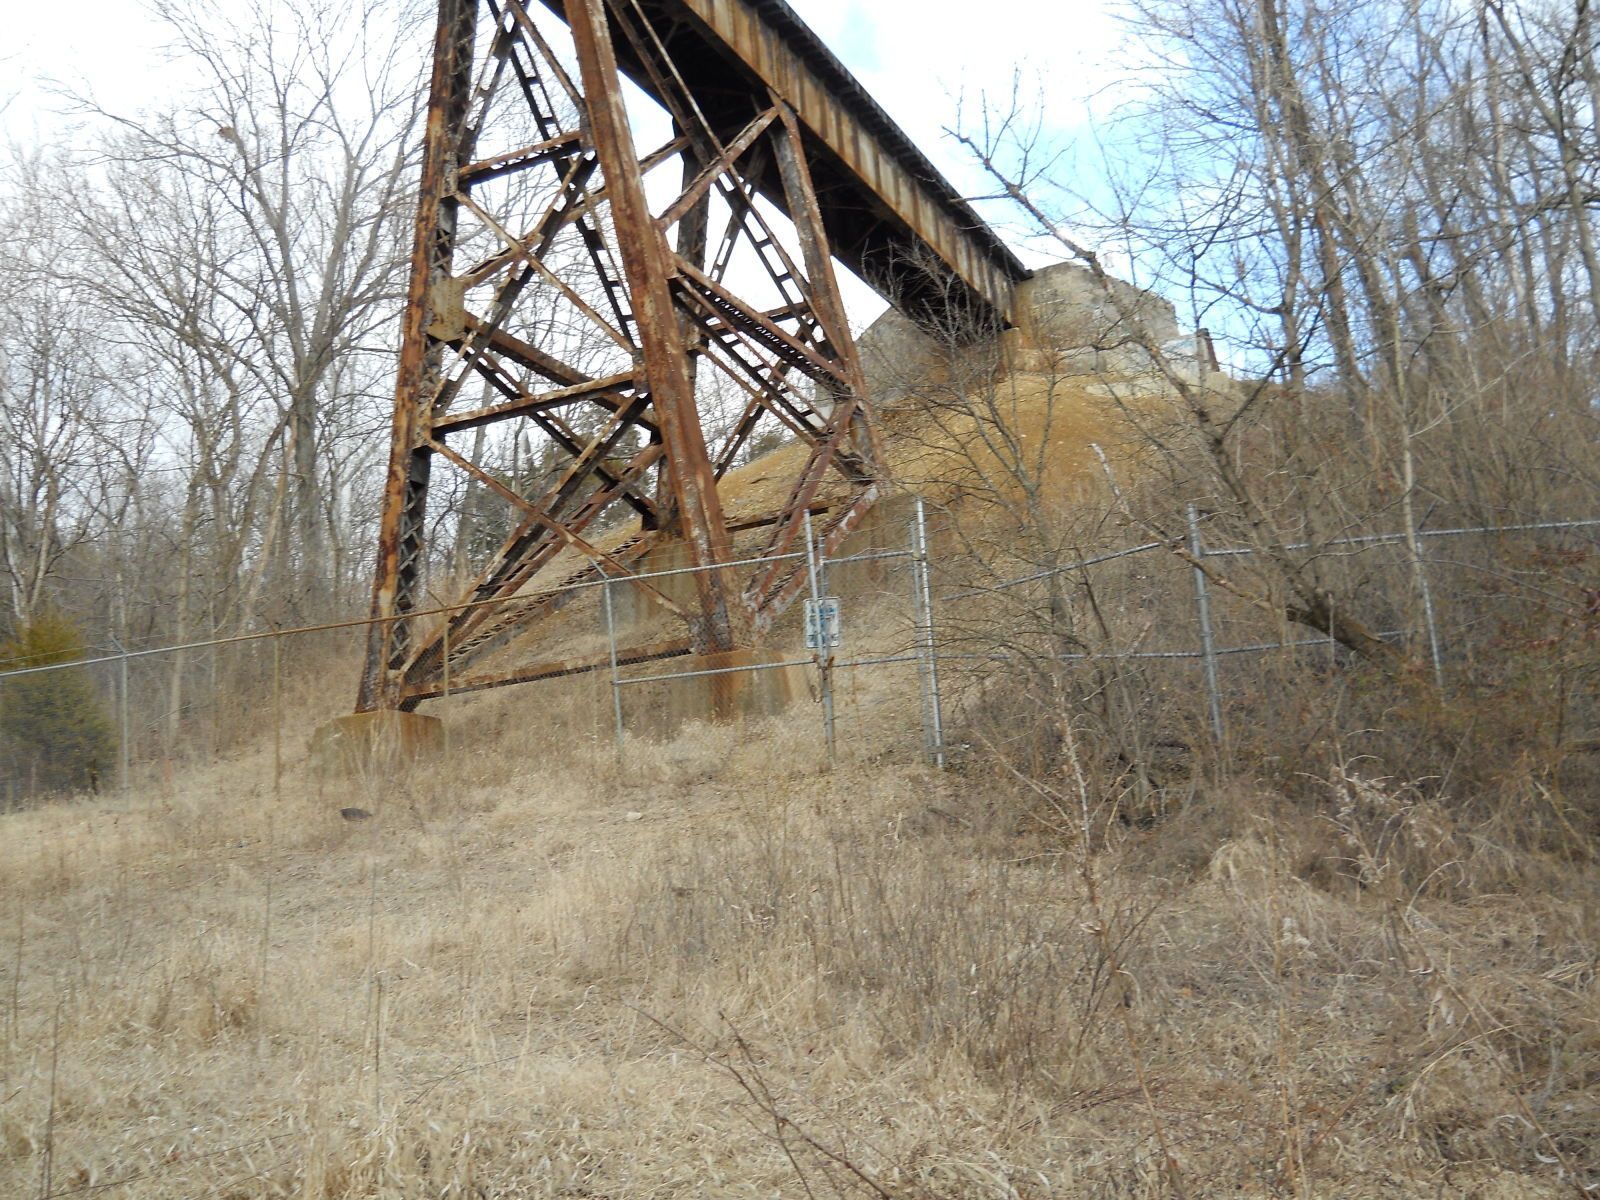 The trestle at pope lick creek unc